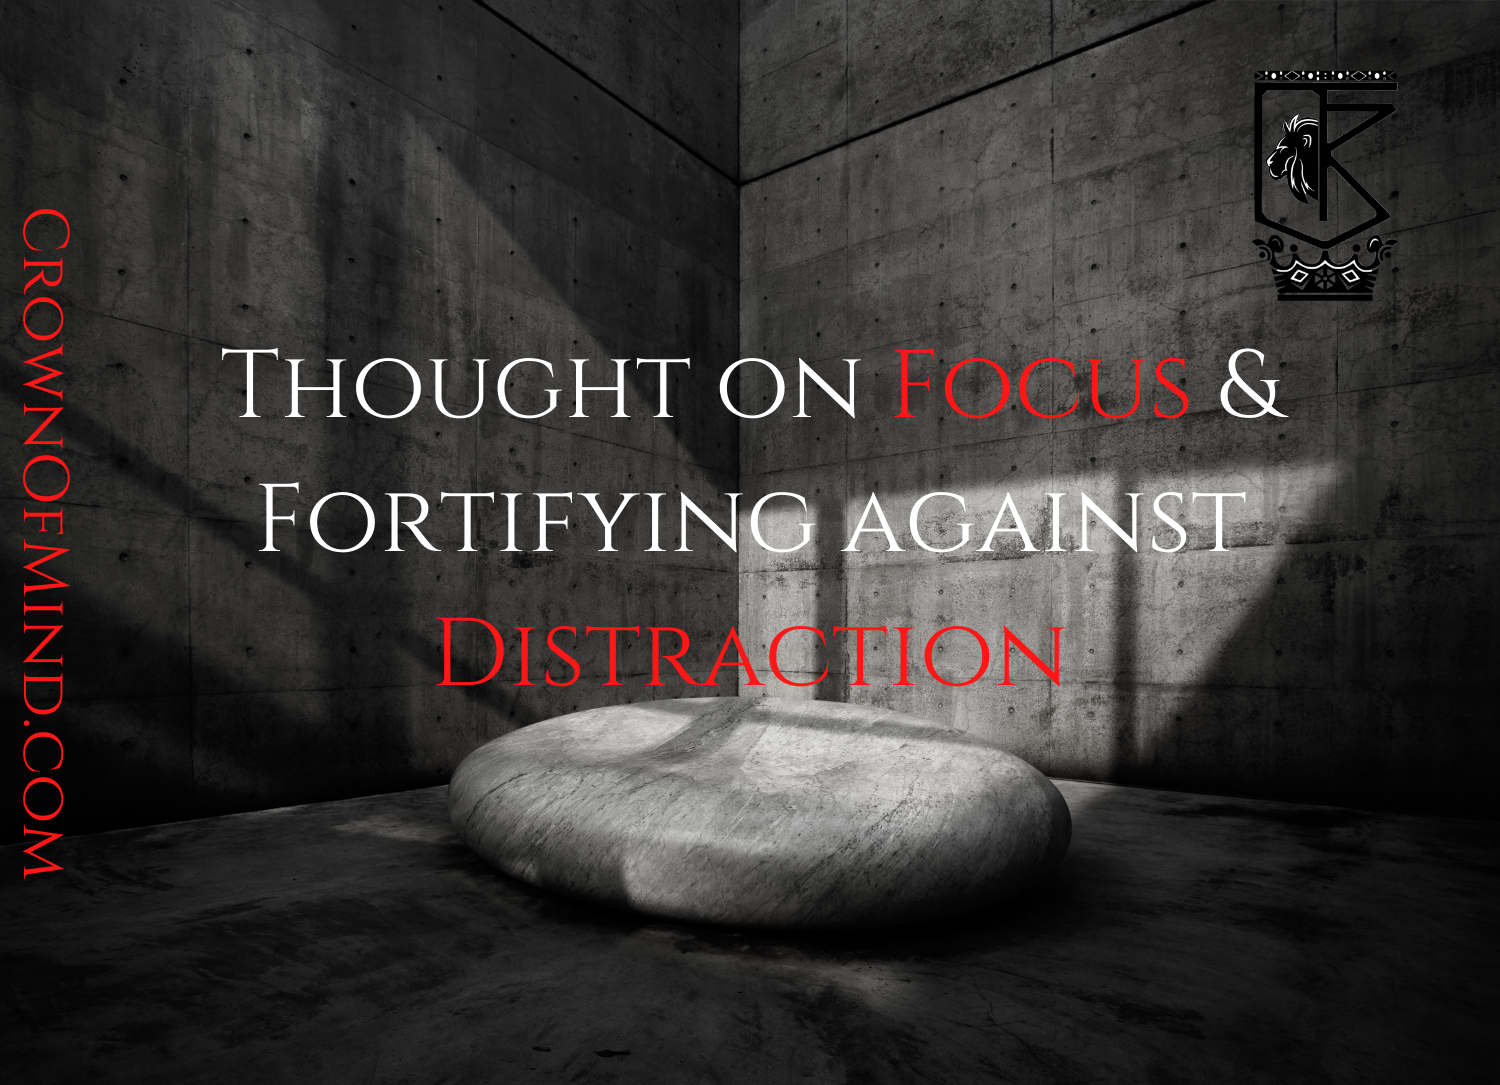 Thought on Focus & Fortifying Against Distraction